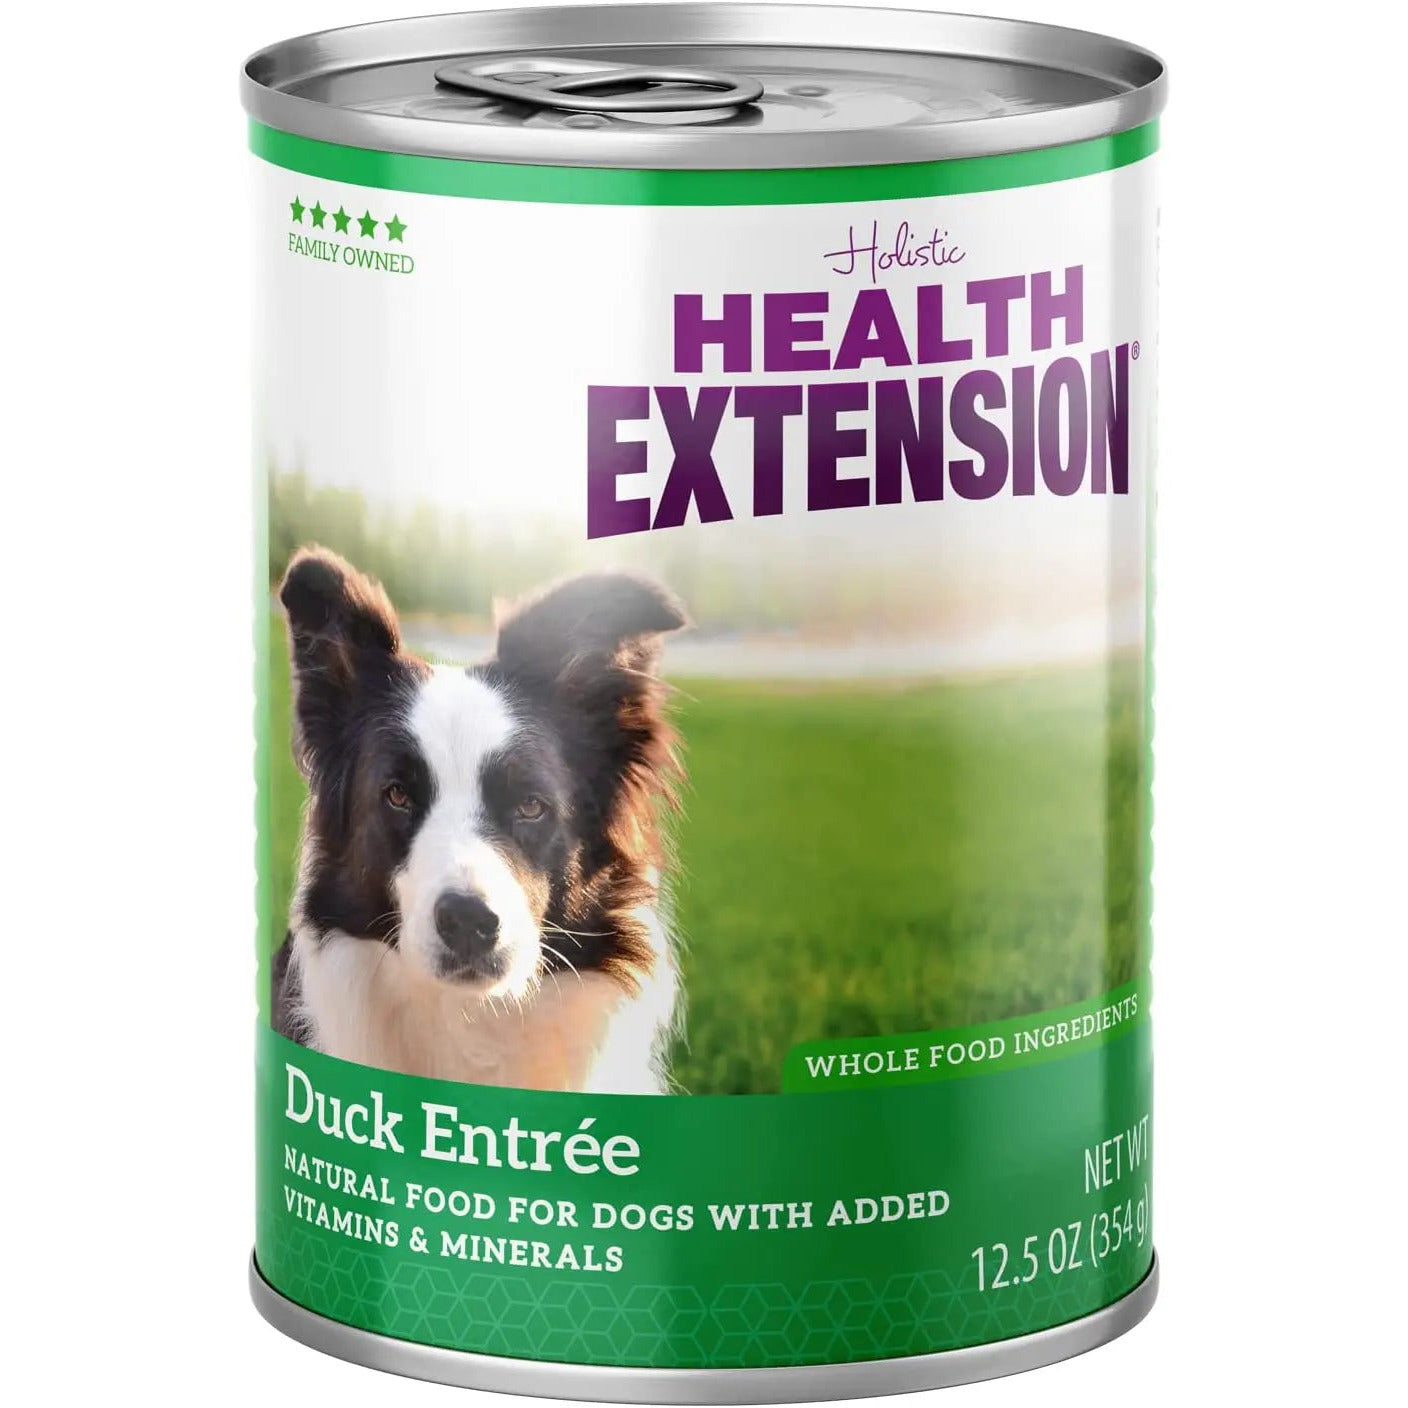 Health Extension Duck Canned Dog Food 12 / 12.5 oz Health Extension